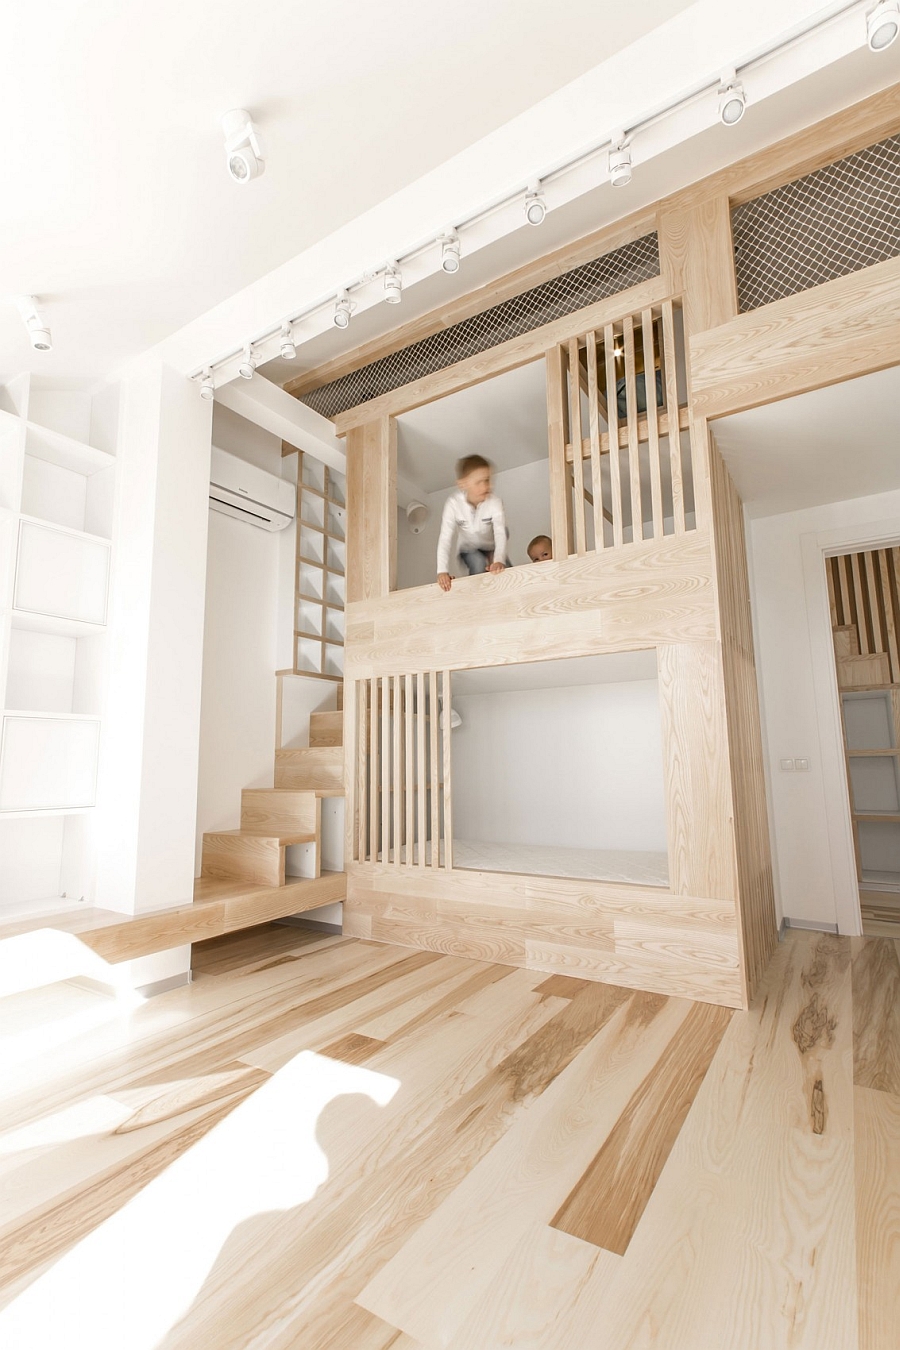 space loft apartment into saving attic playroom turned turn incorporate trendy storage solutions playrooms staircase stylish been